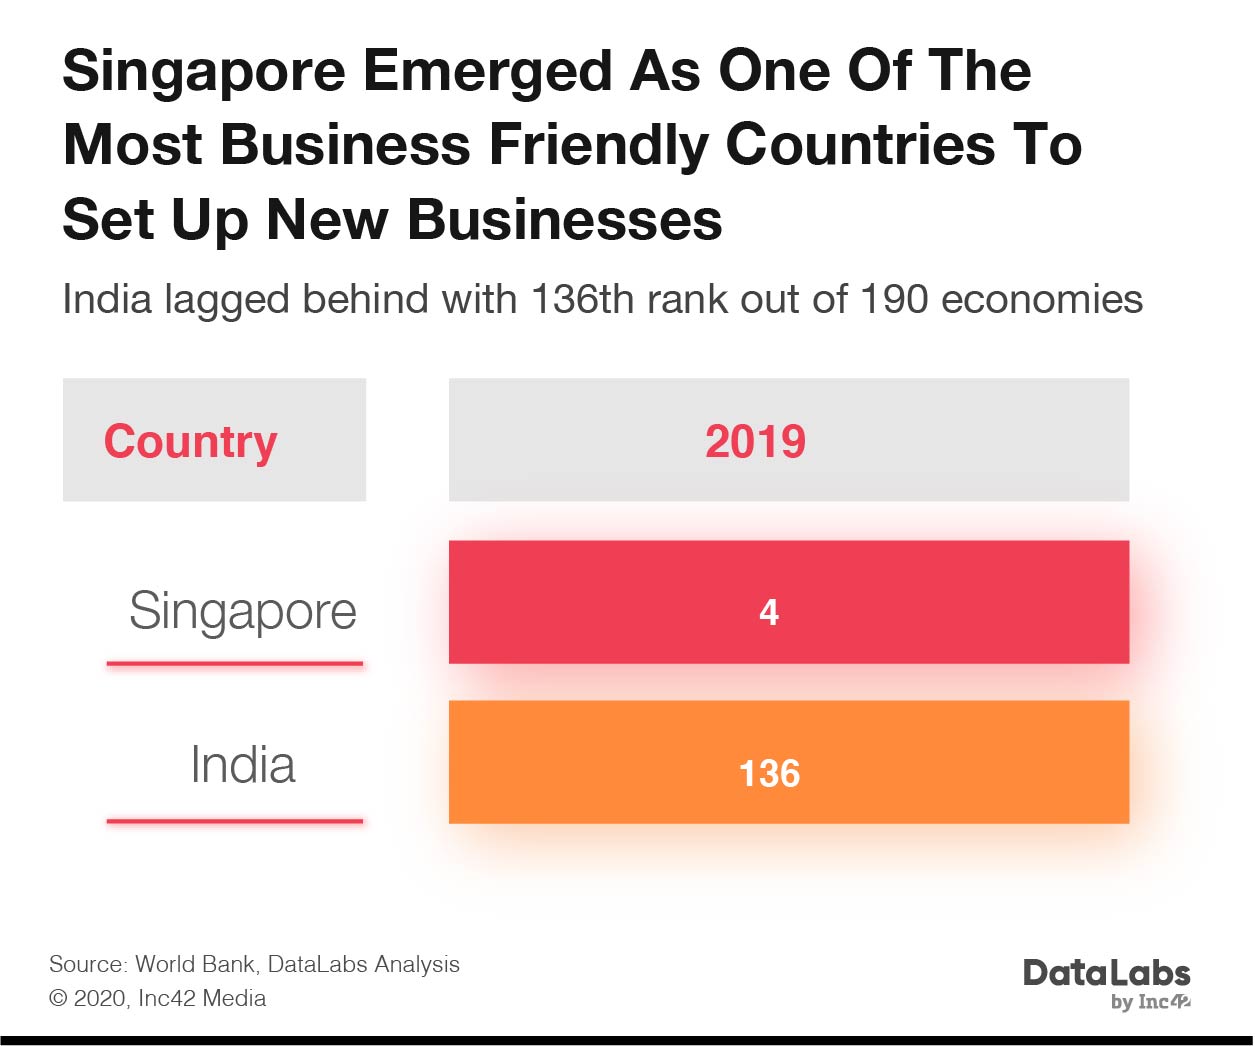 Ease of doing business in Singapore 